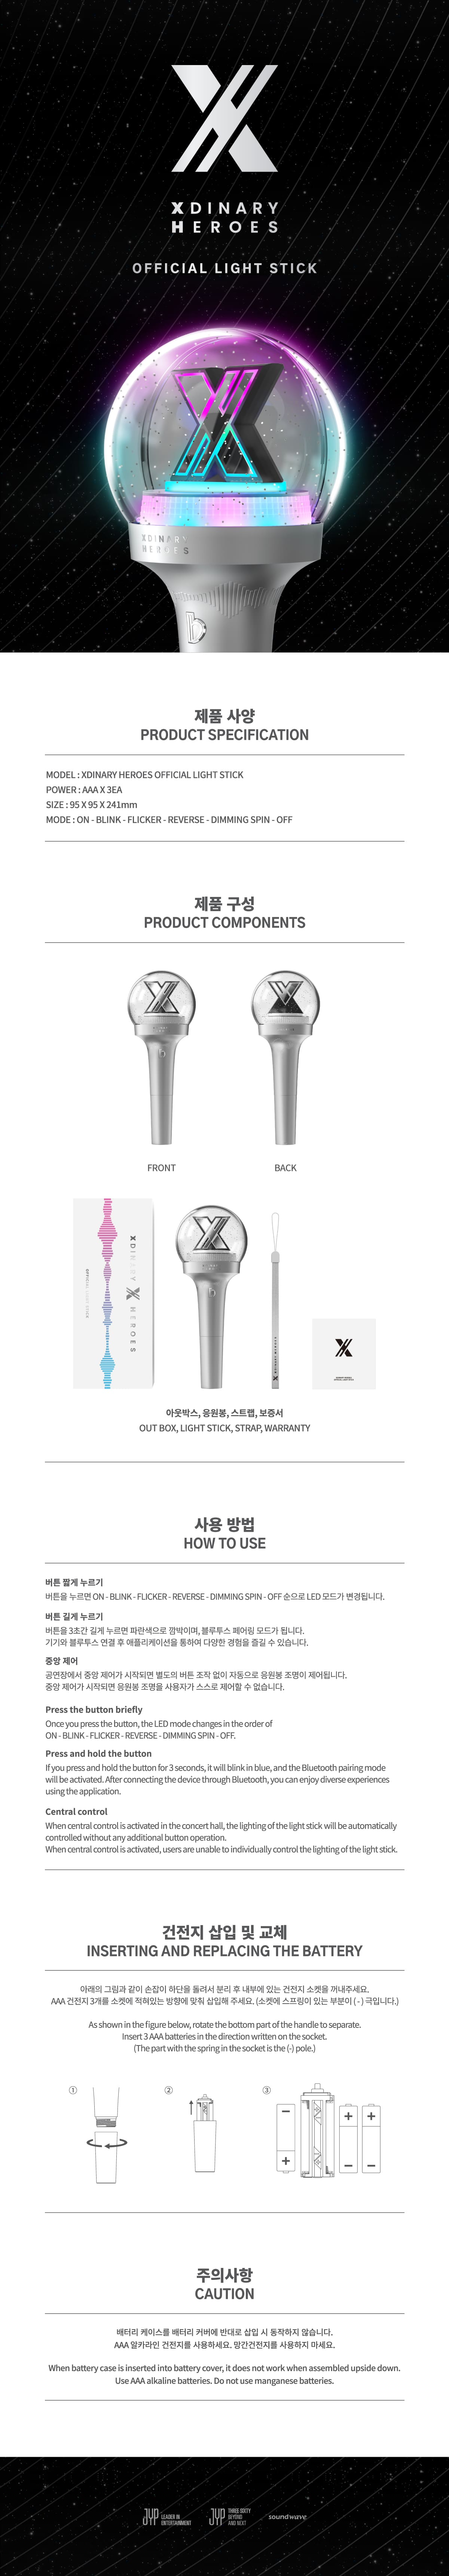 Xdinary Heroes -OFFICIAL LIGHT STICK